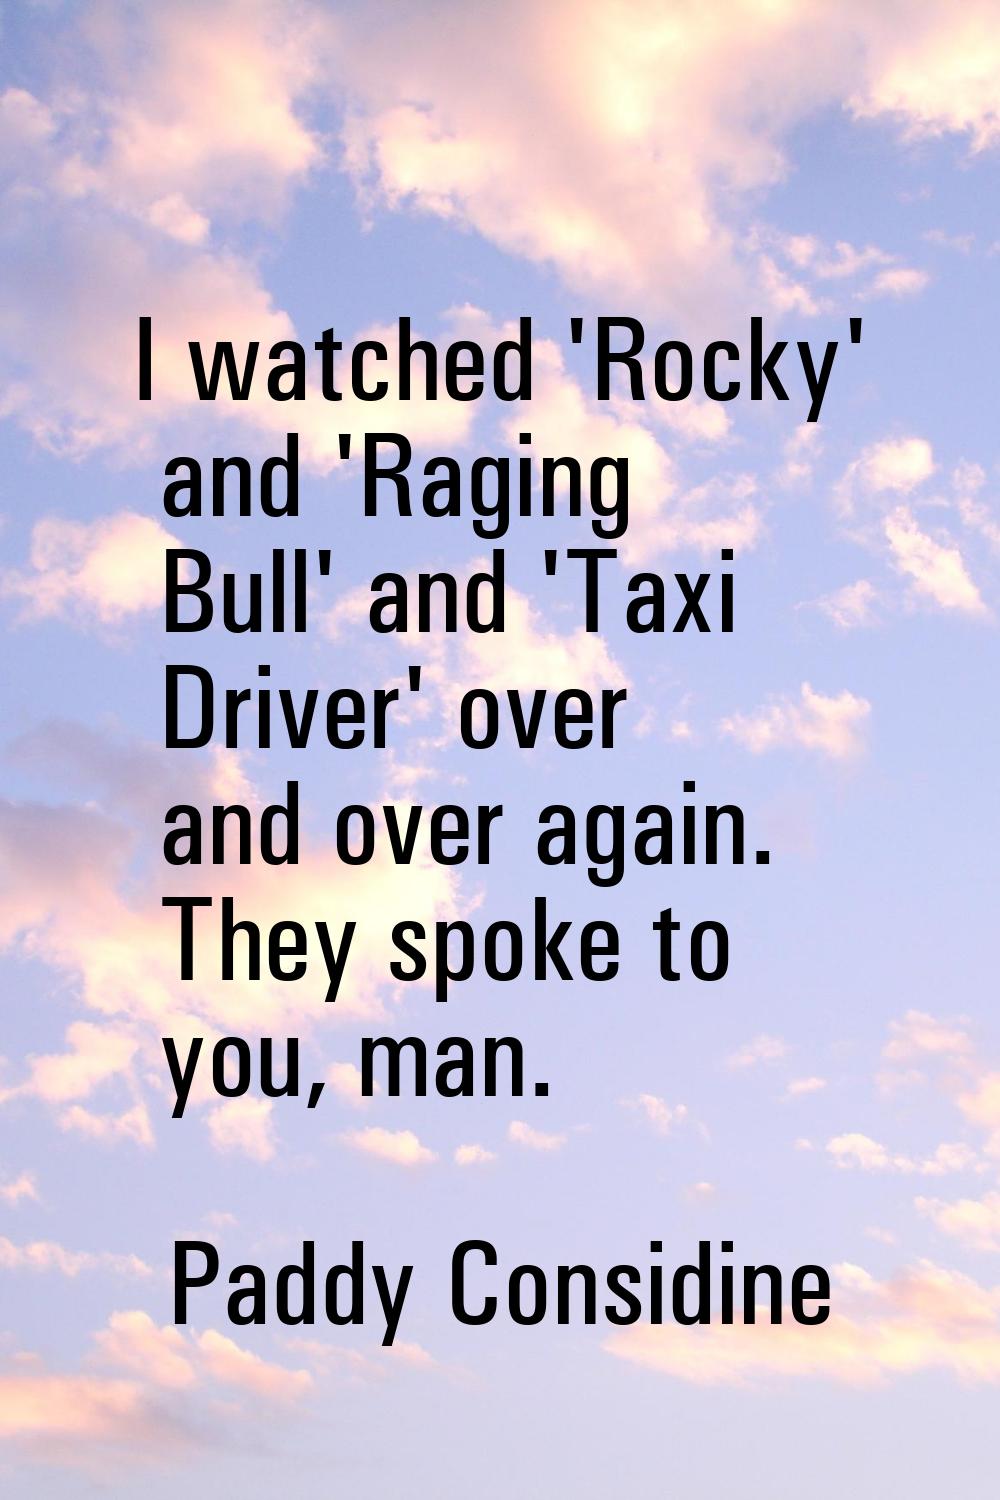 I watched 'Rocky' and 'Raging Bull' and 'Taxi Driver' over and over again. They spoke to you, man.